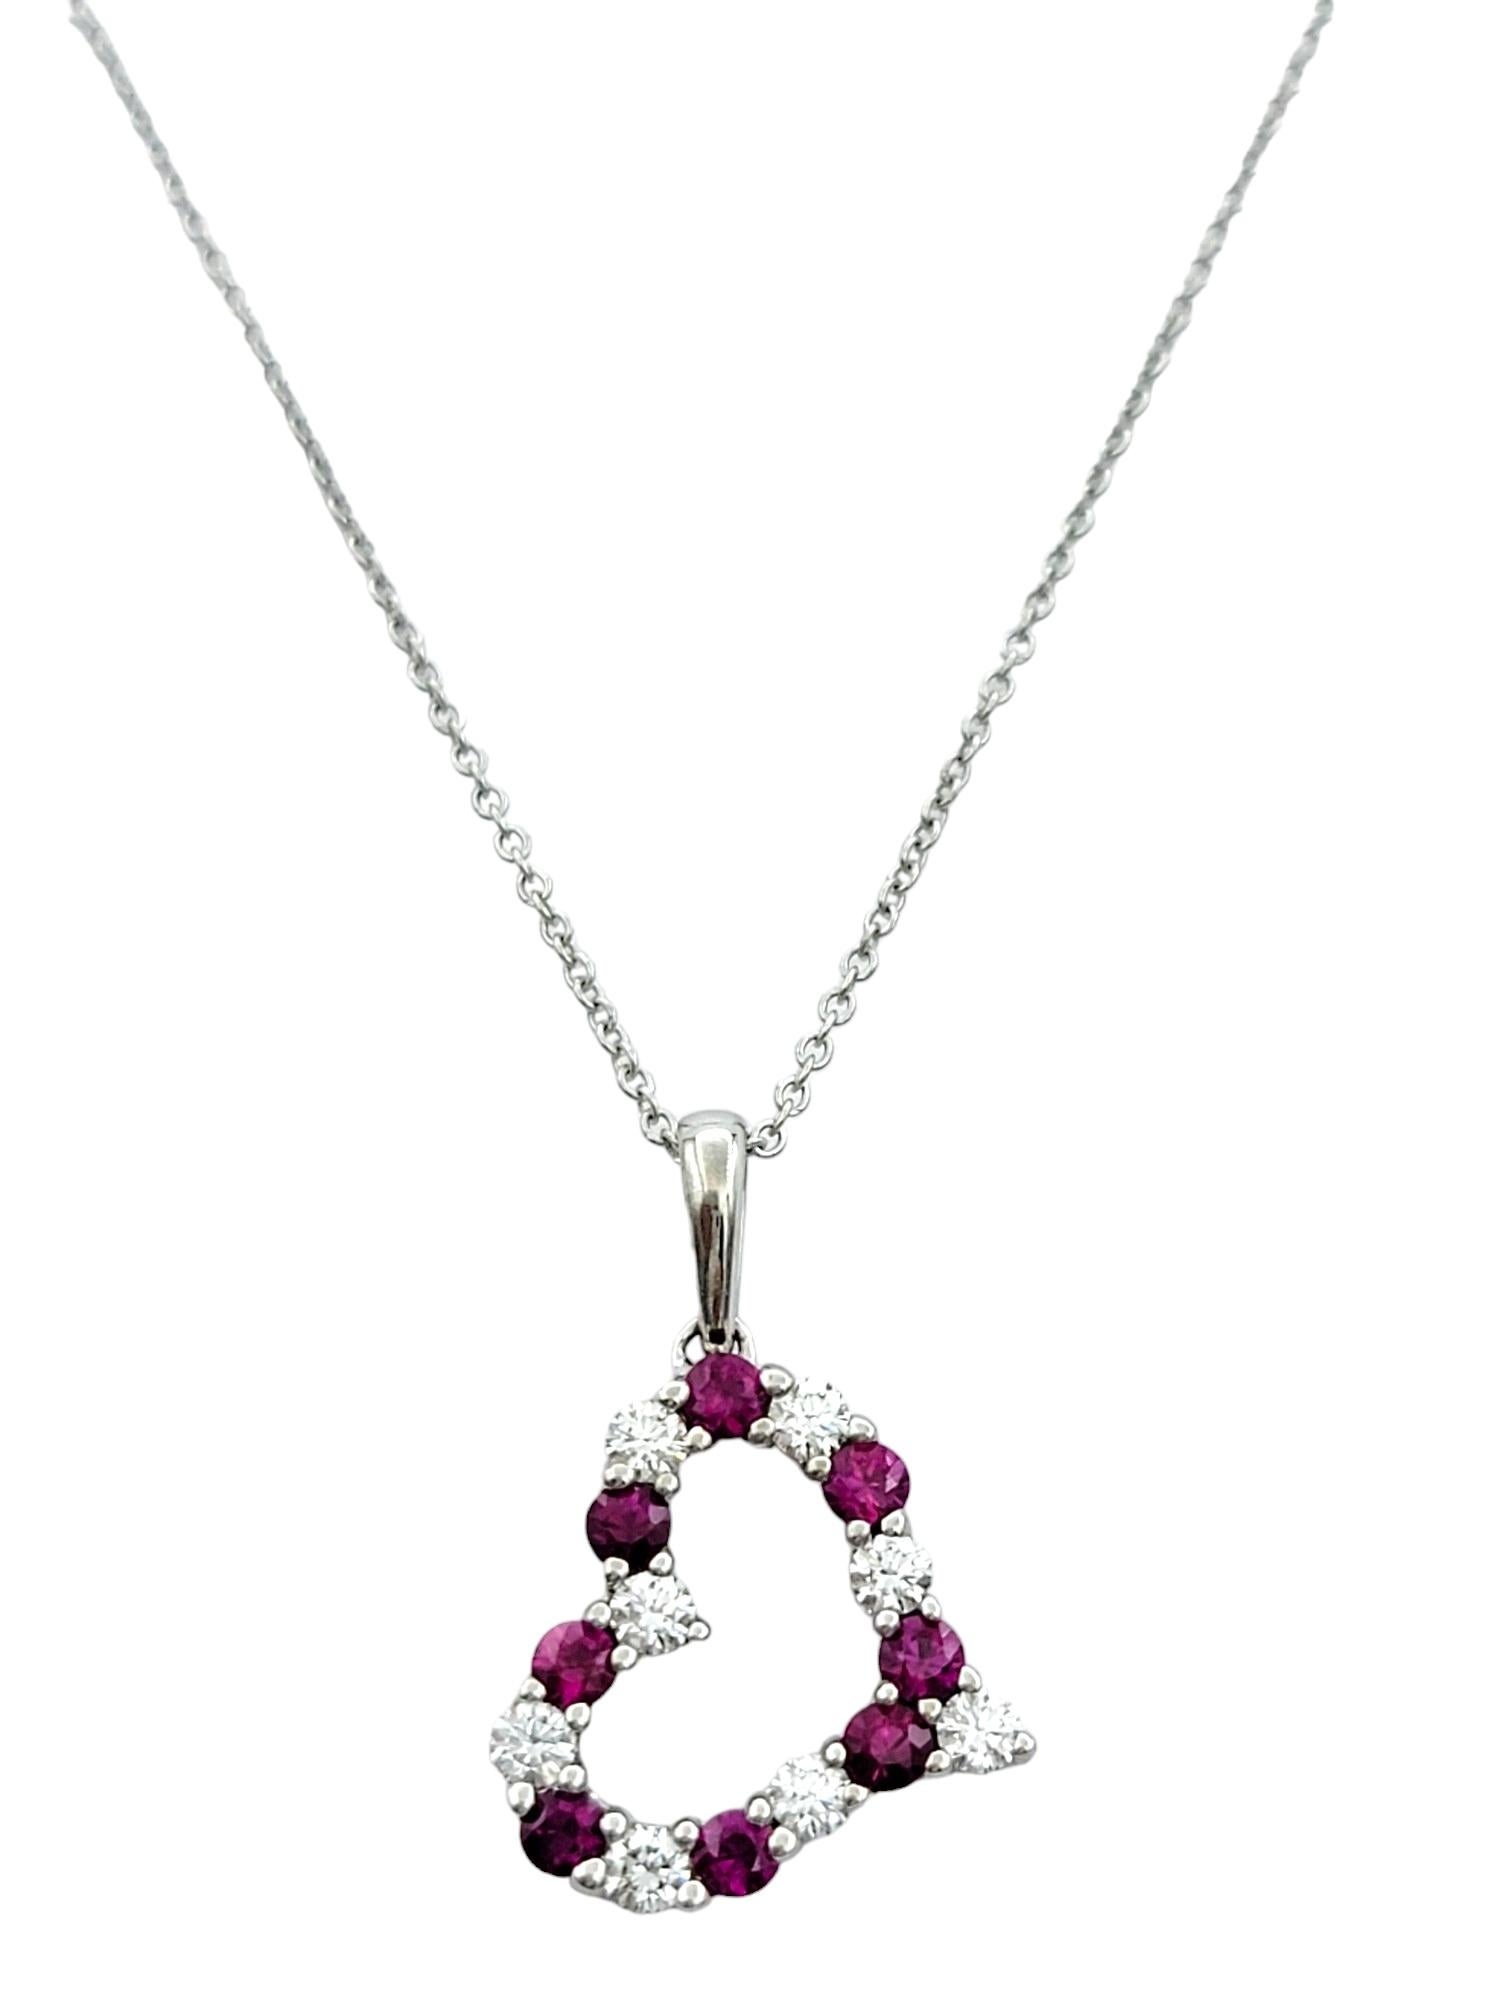 This enchanting necklace is a testament to love and sophistication. Crafted in 14 karat white gold, it features an open heart design adorned with alternating rubies and diamonds, creating a captivating contrast that radiates elegance and charm.

The